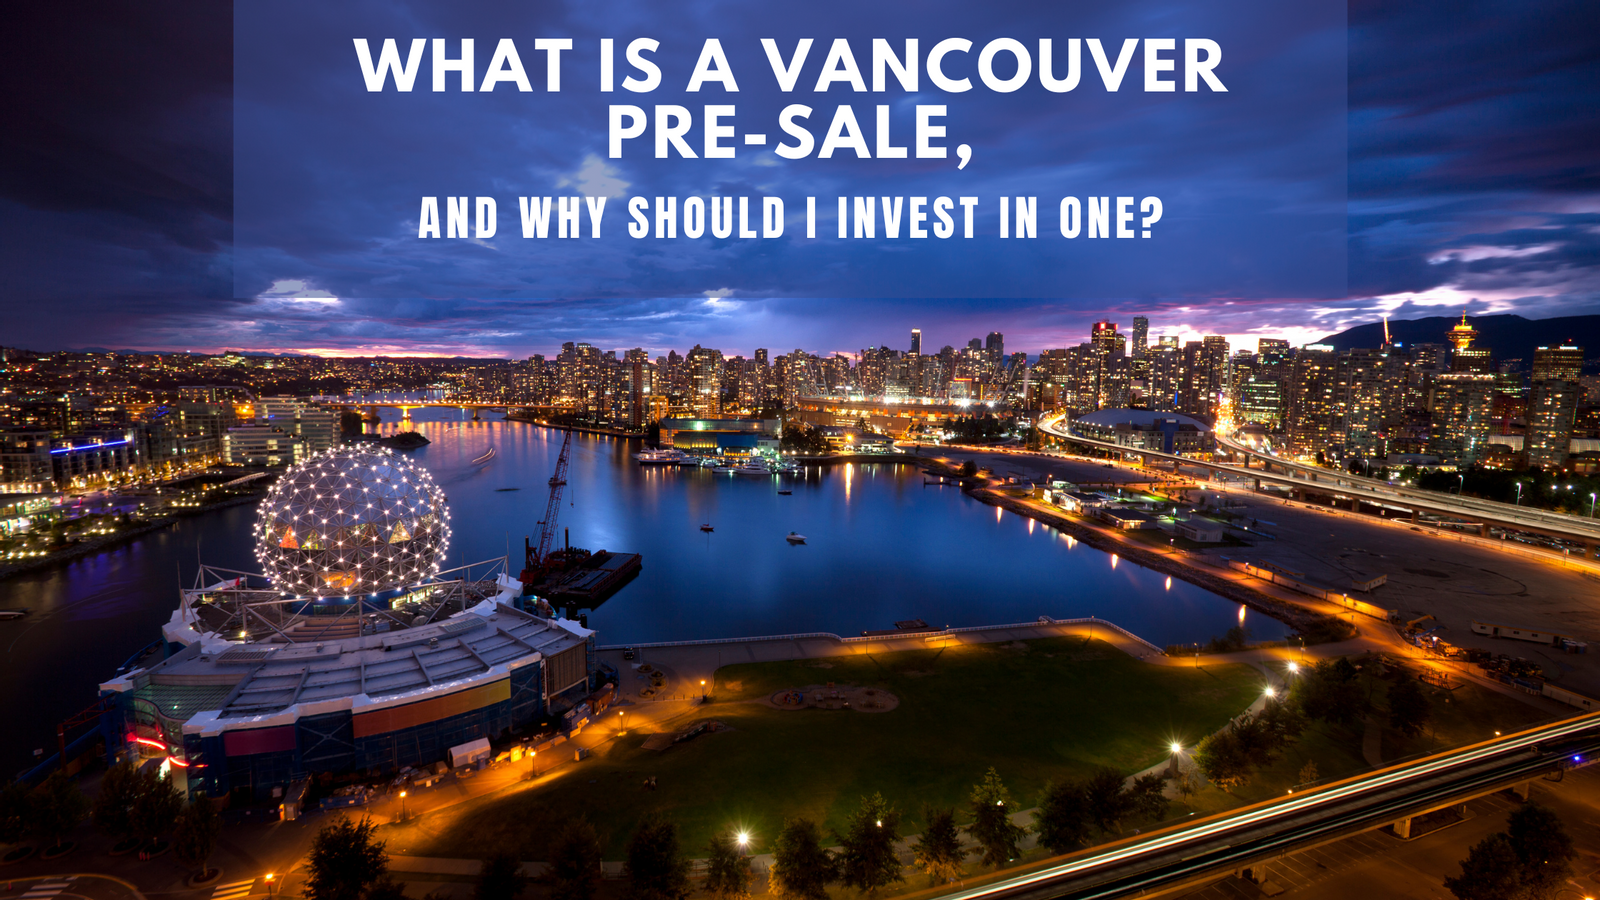 What is a Vancouver pre-sale, and why should I invest in one?